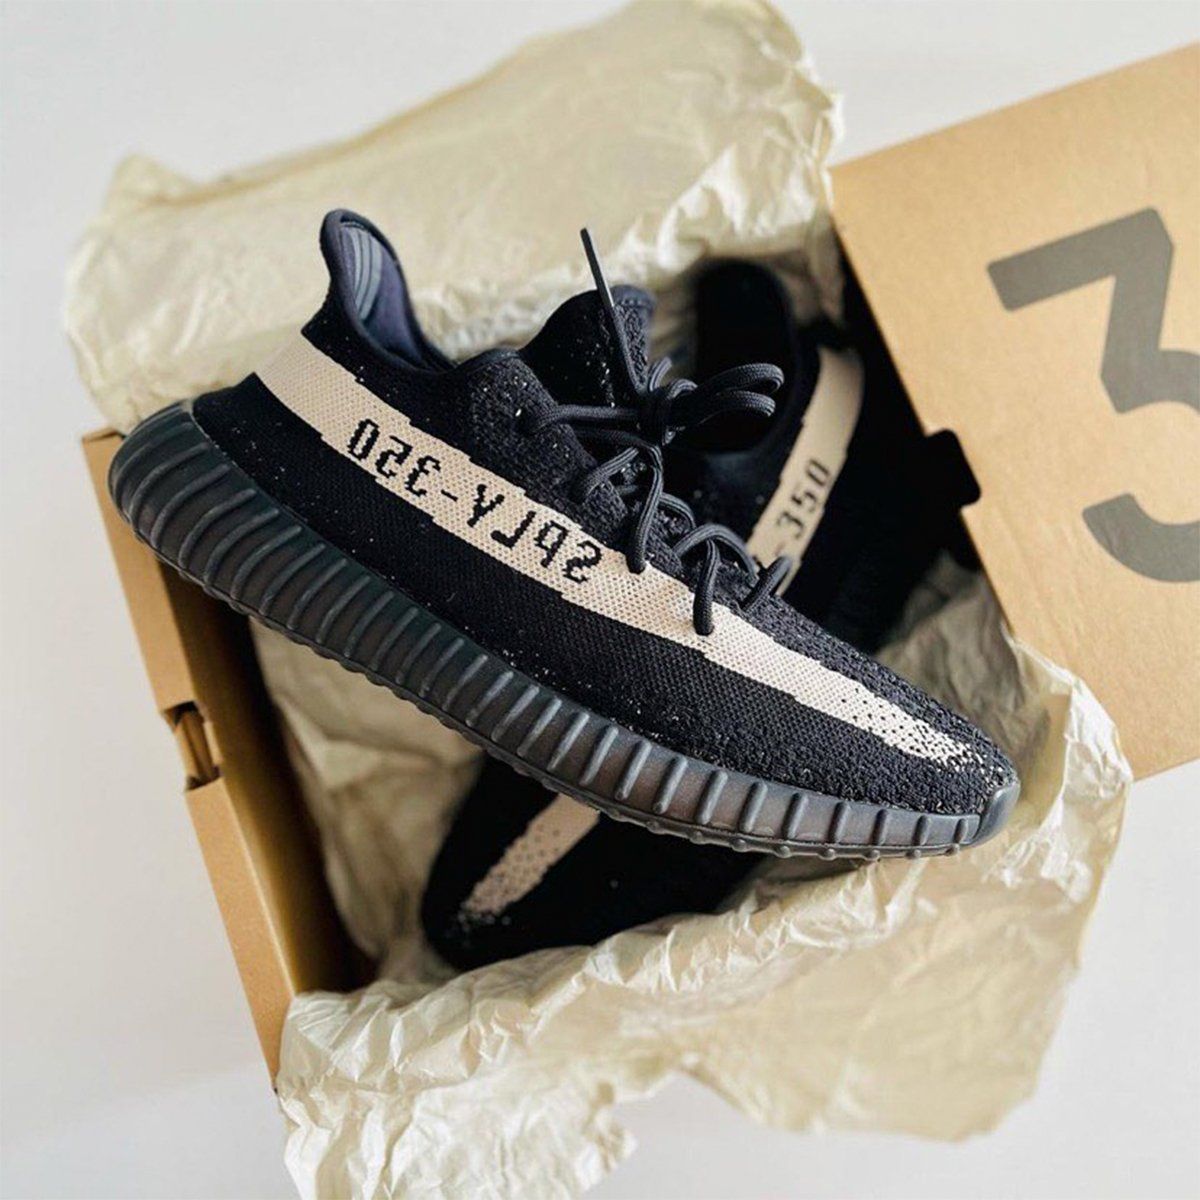 Schedule fluctuate Paternal Where to Buy the YEEZY 350 V2 "Oreo" Restock | HOUSE OF HEAT